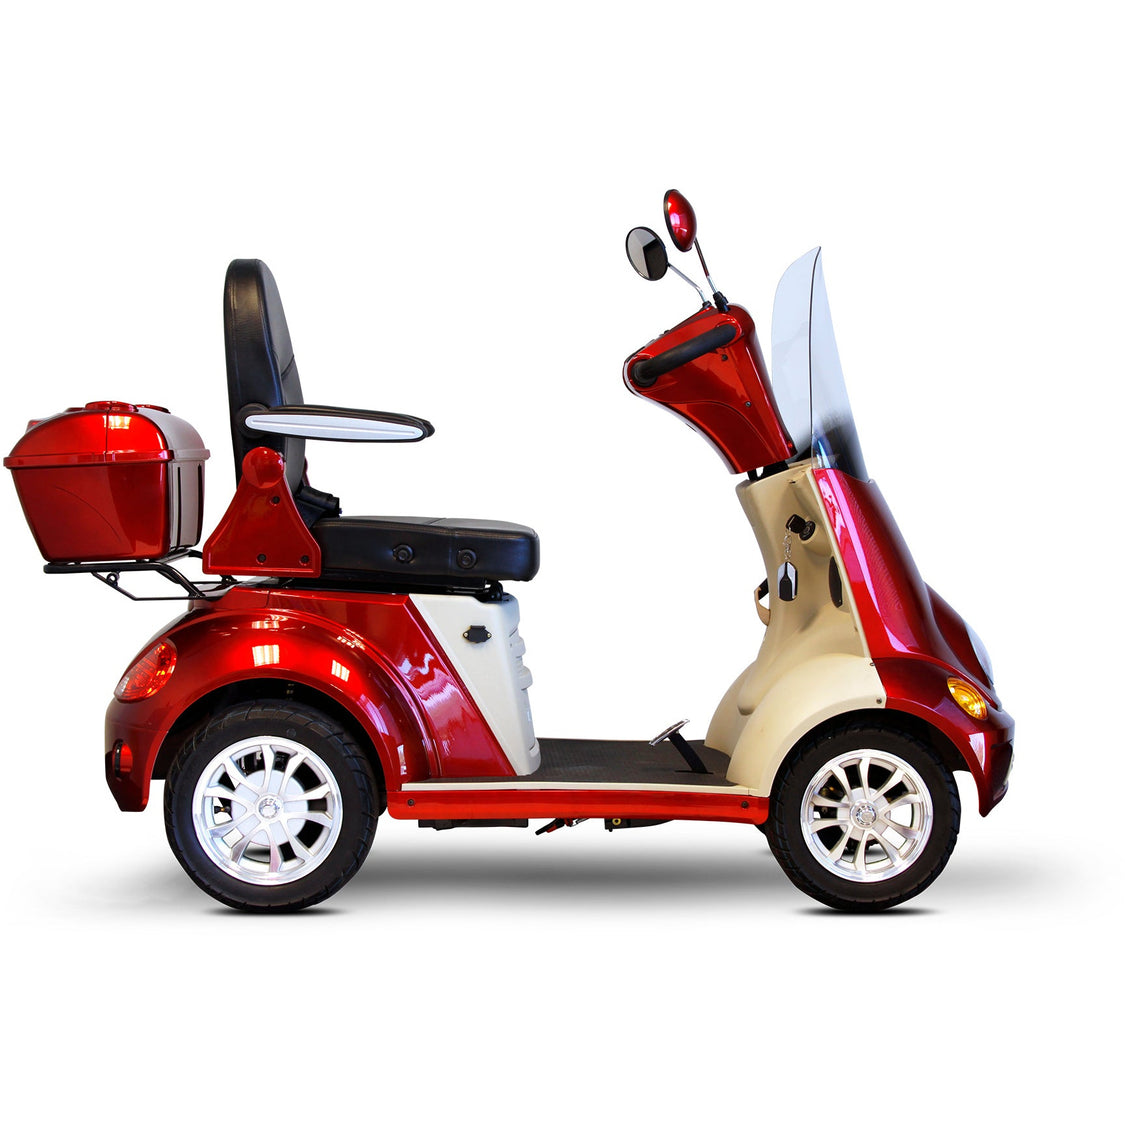 Full-size/heavy-duty mobility scooters